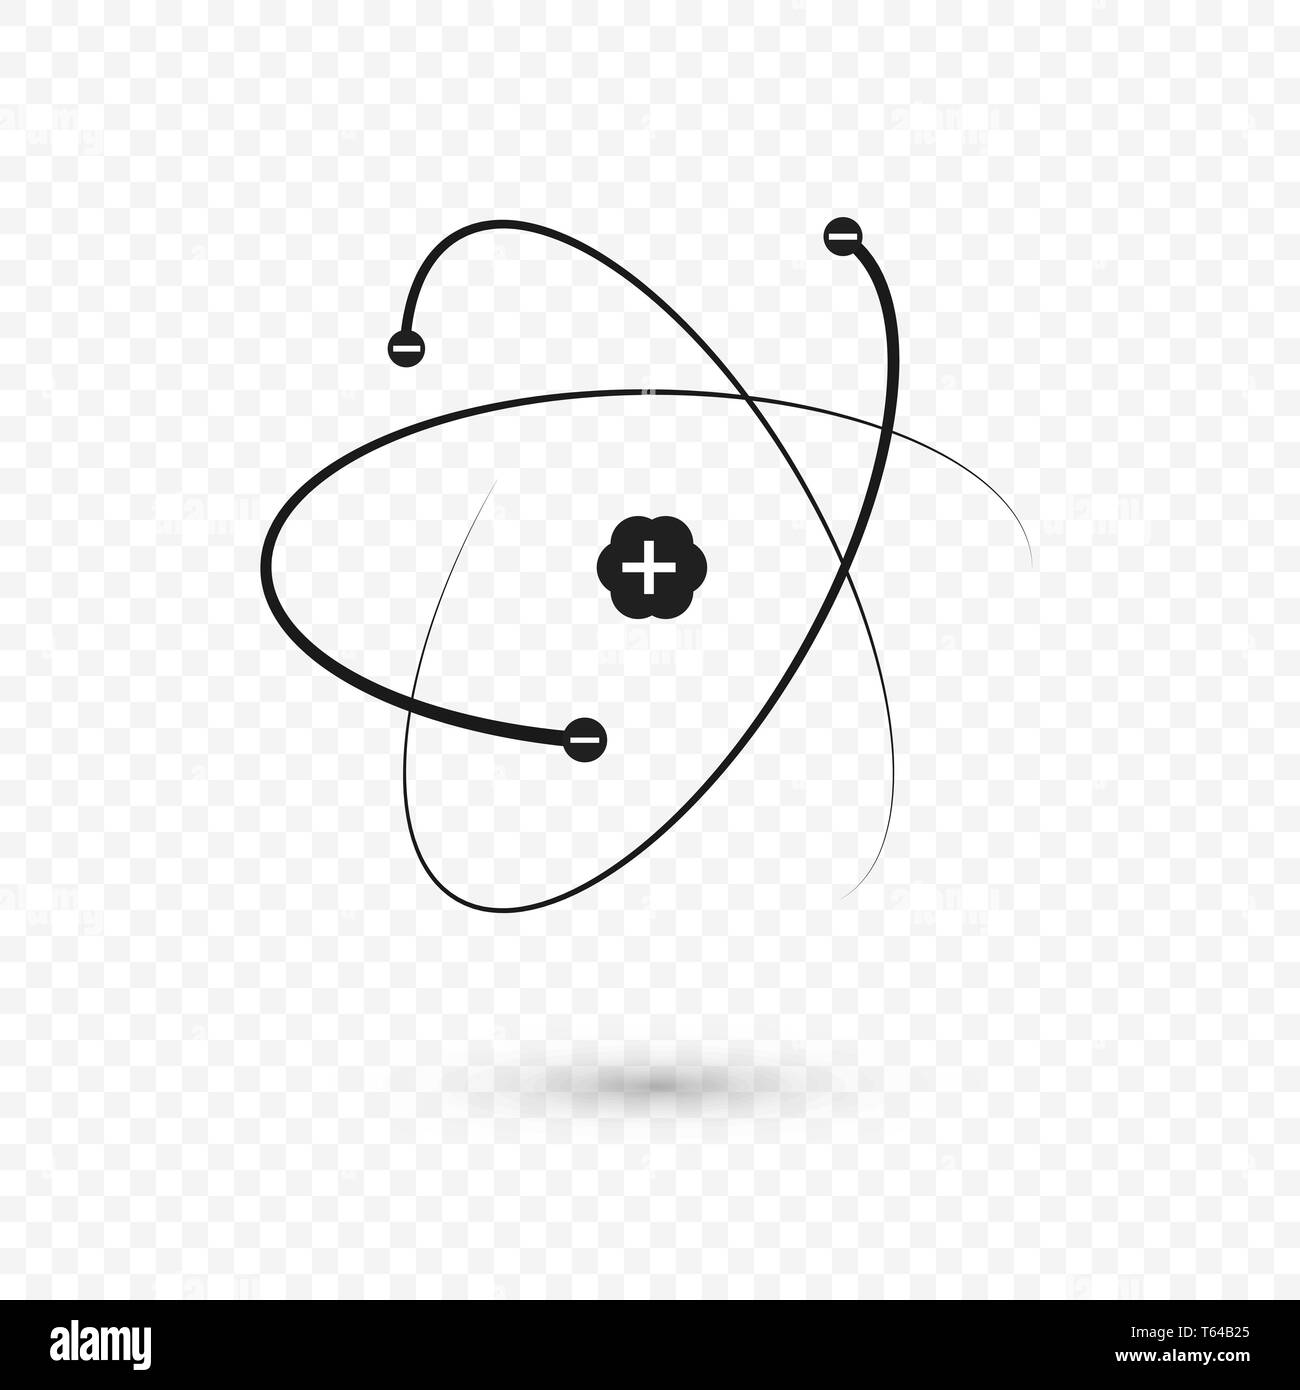 Atom structure nucleus and electrons. Atom icon.  vector illustration isolated on transparent background Stock Vector